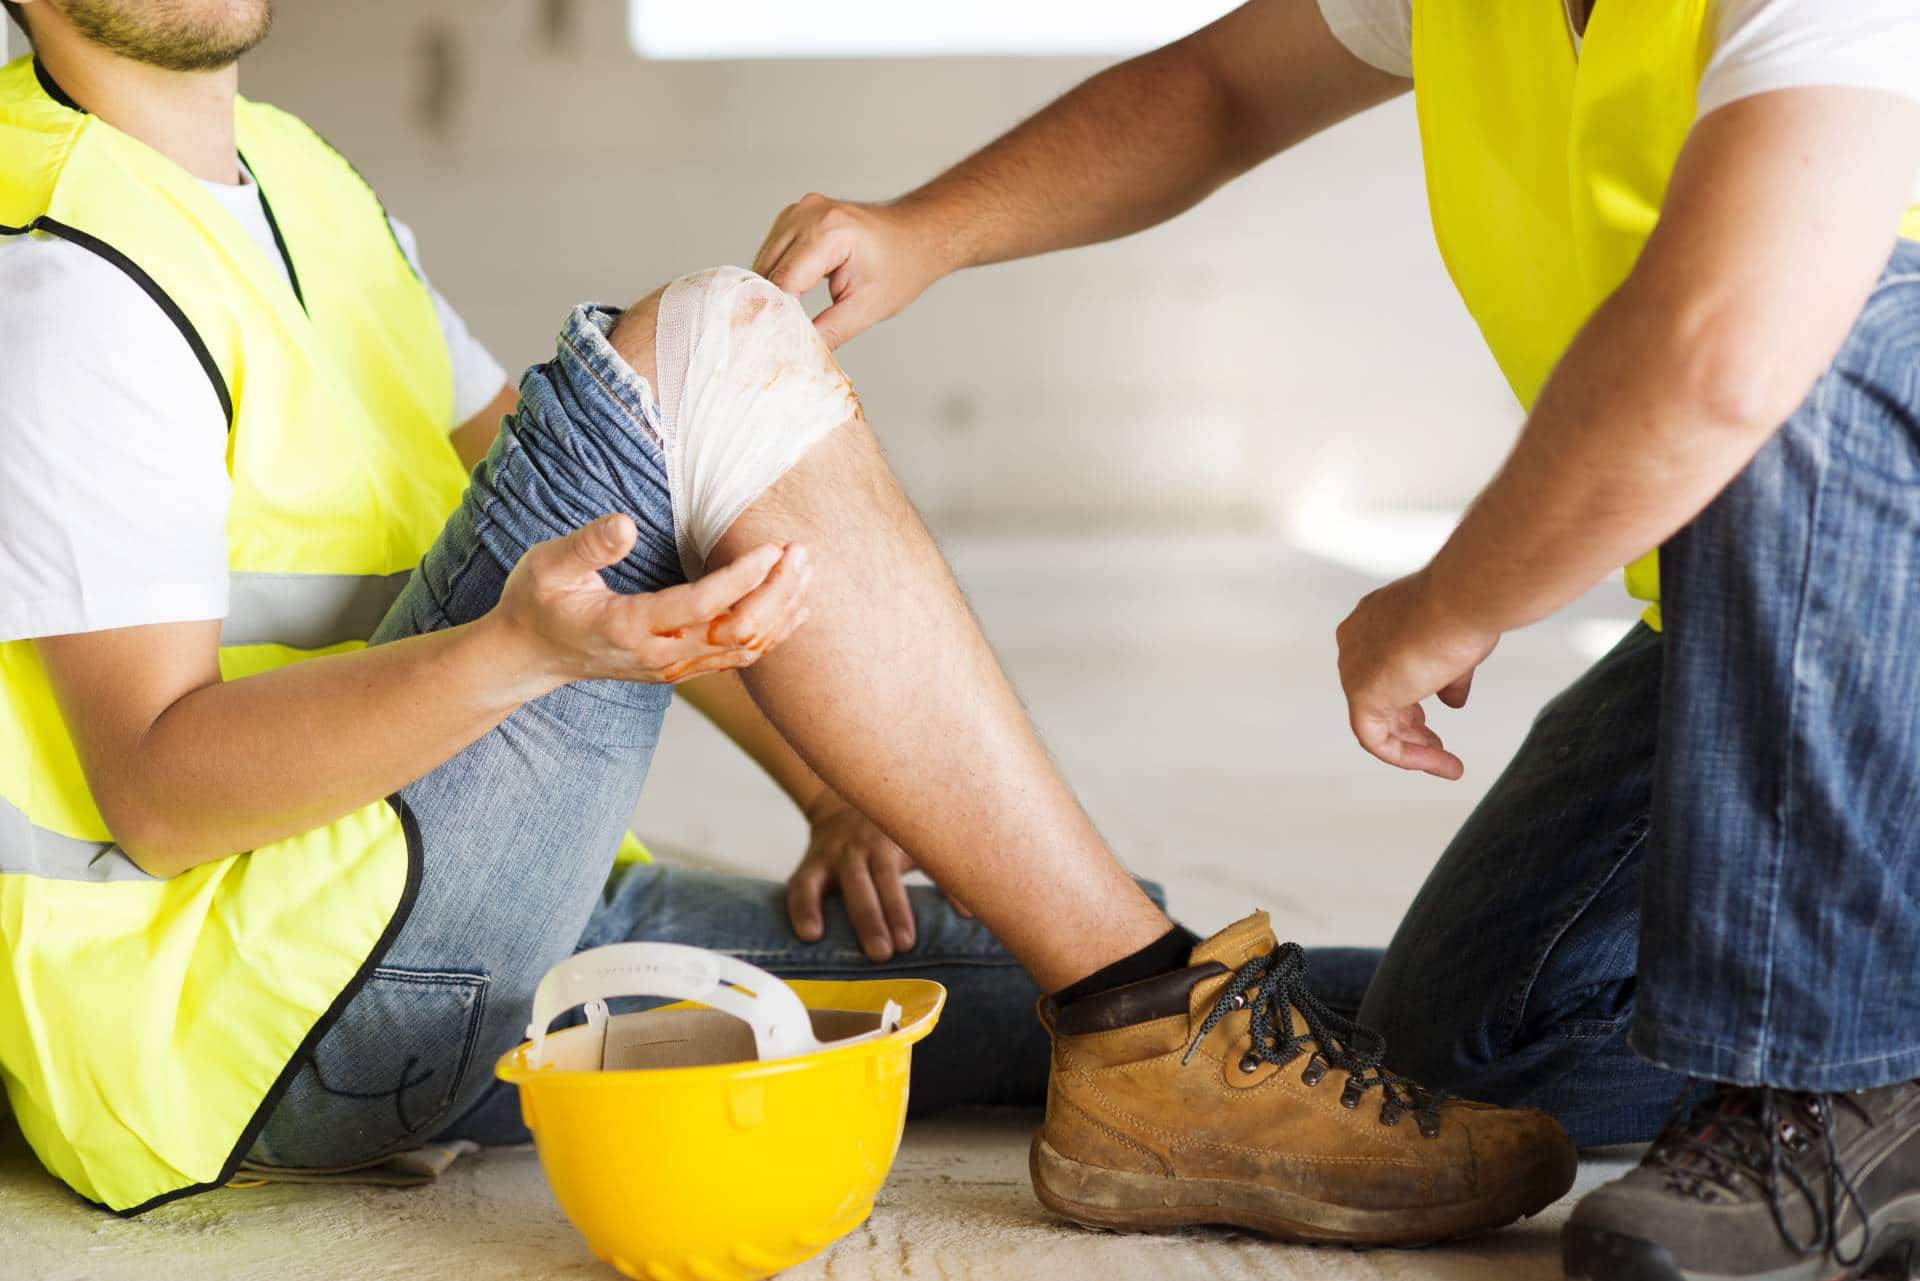 Injured at work? Schedule a free consulation with the Angell Law Firm.